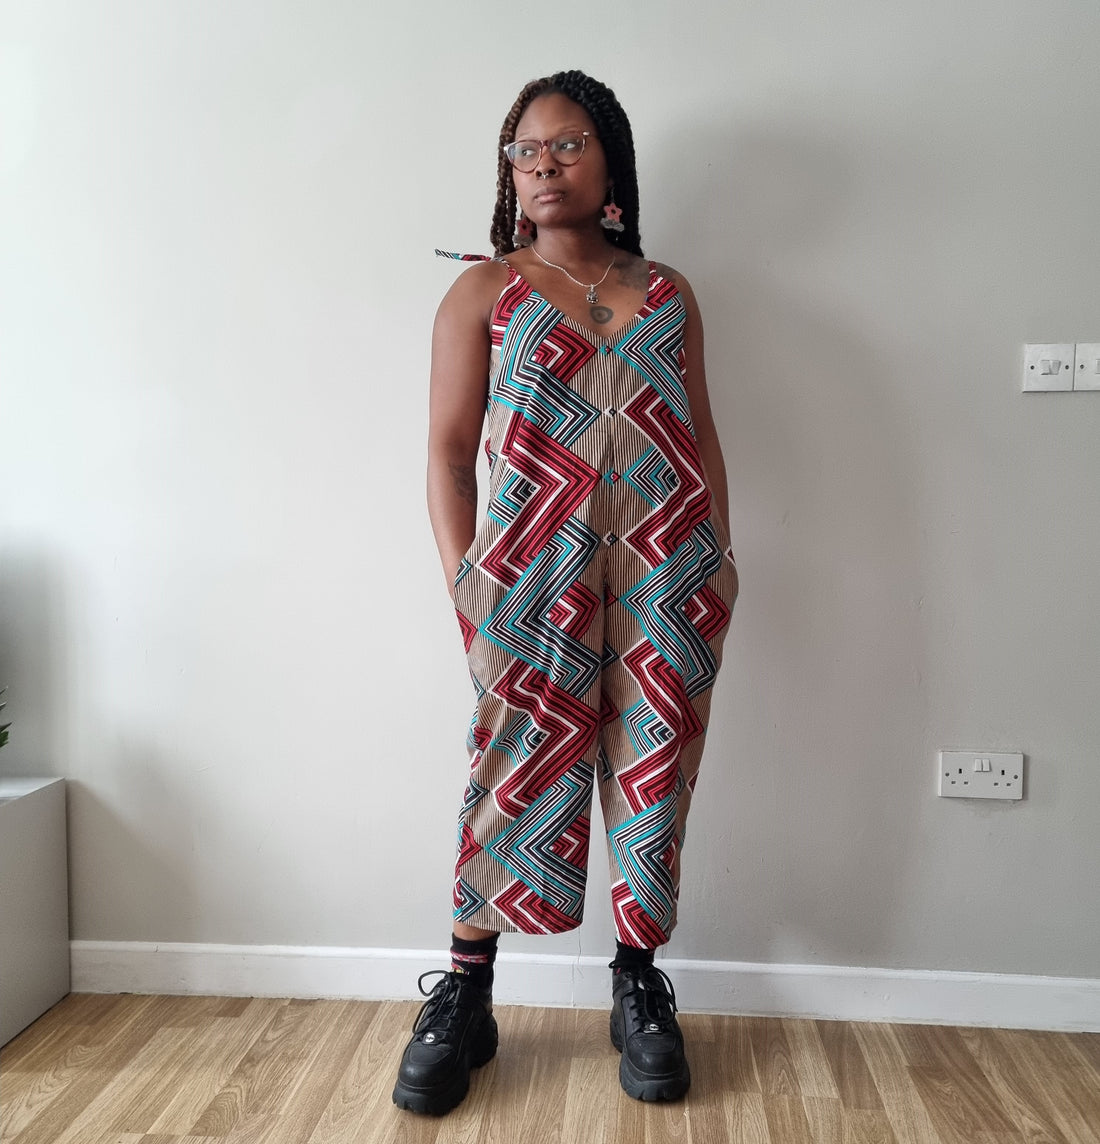 Montana exuding style and confidence in a striking 'Mimi G Style' jumpsuit made from the 'Fashionably Late' African print wax fabric by Dovetailed London, embracing bold patterns and contemporary fashion.